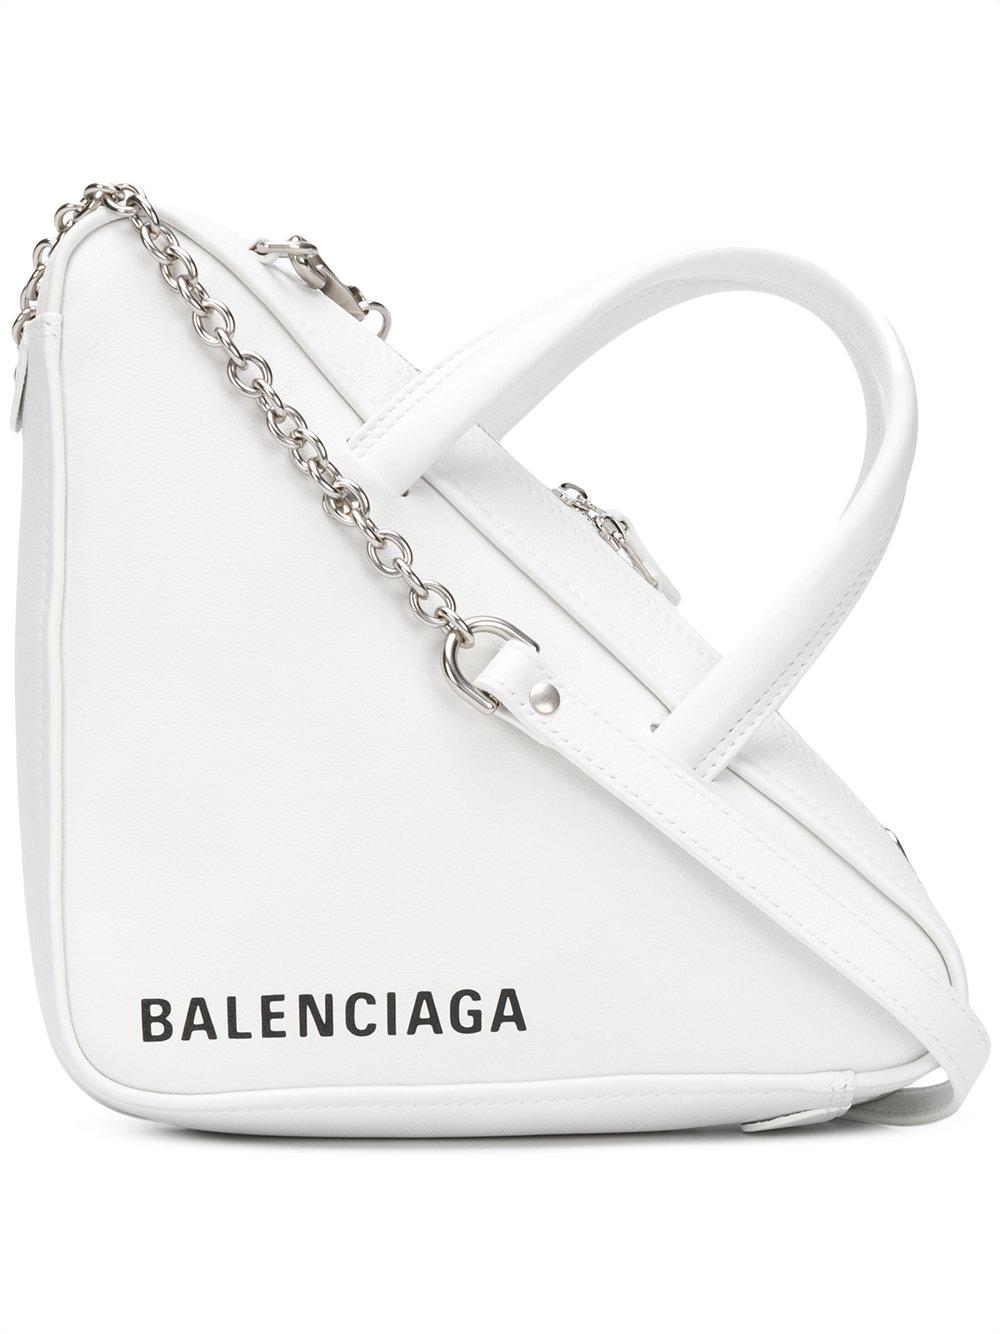 Balenciaga Triangle Duffle Xs With Chain in White - Lyst